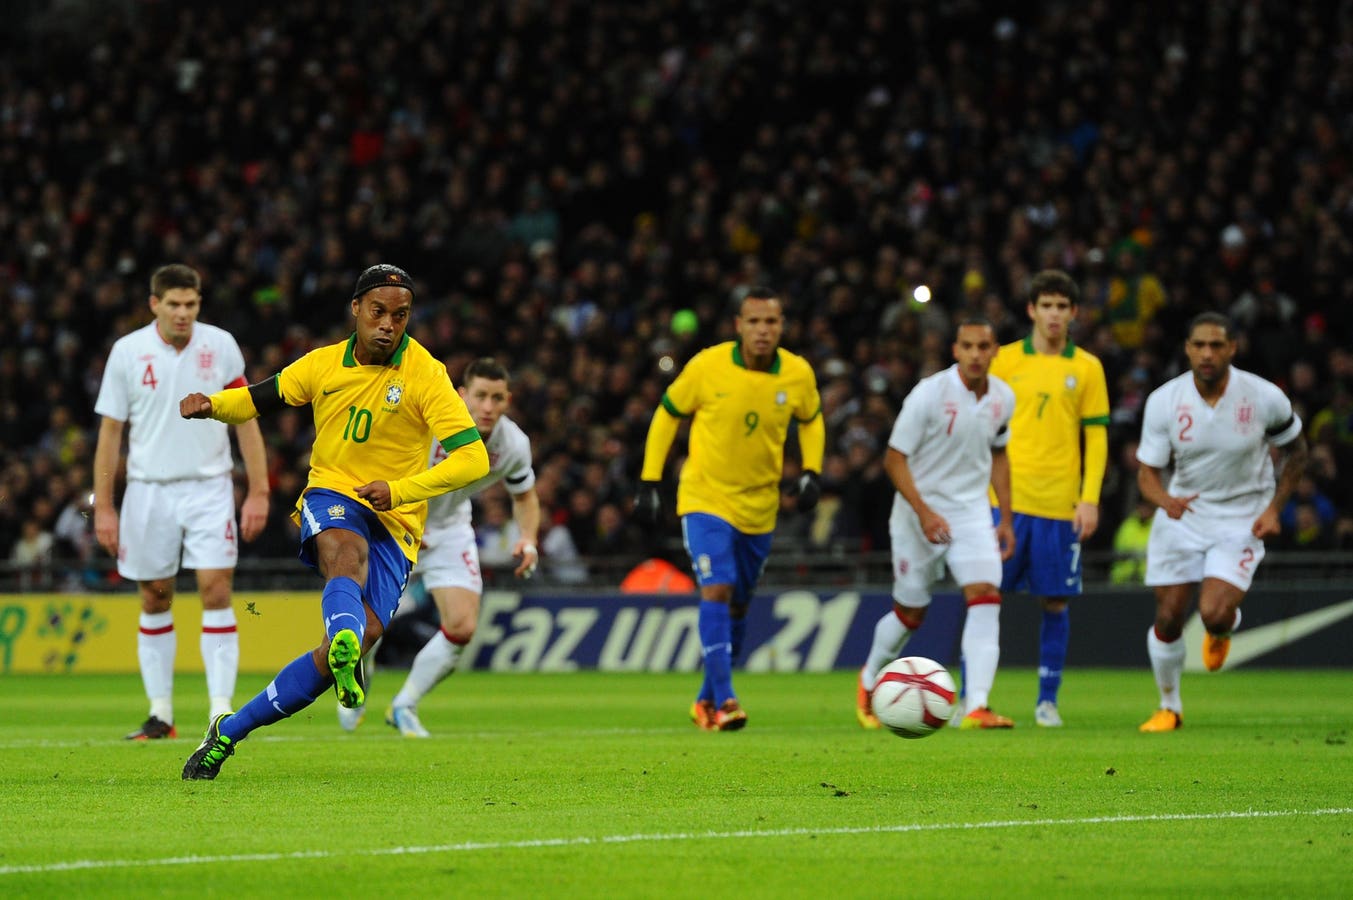 England Will Take On Brazil, Restoring An Iconic Rivalry